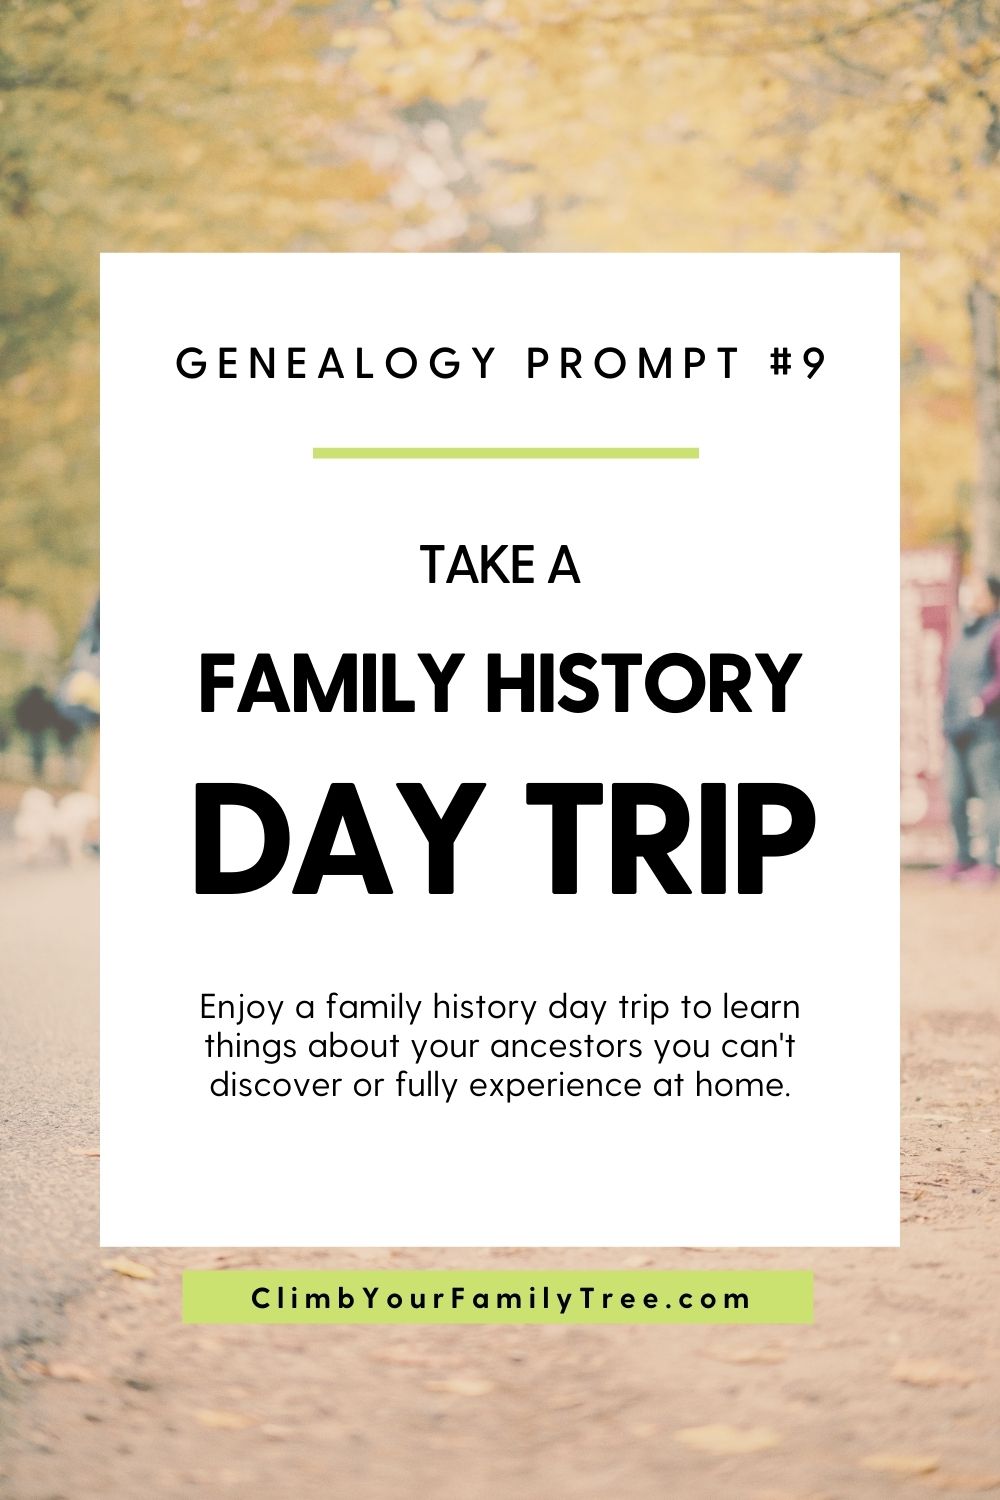 Genealogy Prompt 9 - Take a Family History Day Trip - Enjoy a family history day trip to learn things about your ancestors you can't discover or fully experience at home. - ClimbYourFamilyTree.com